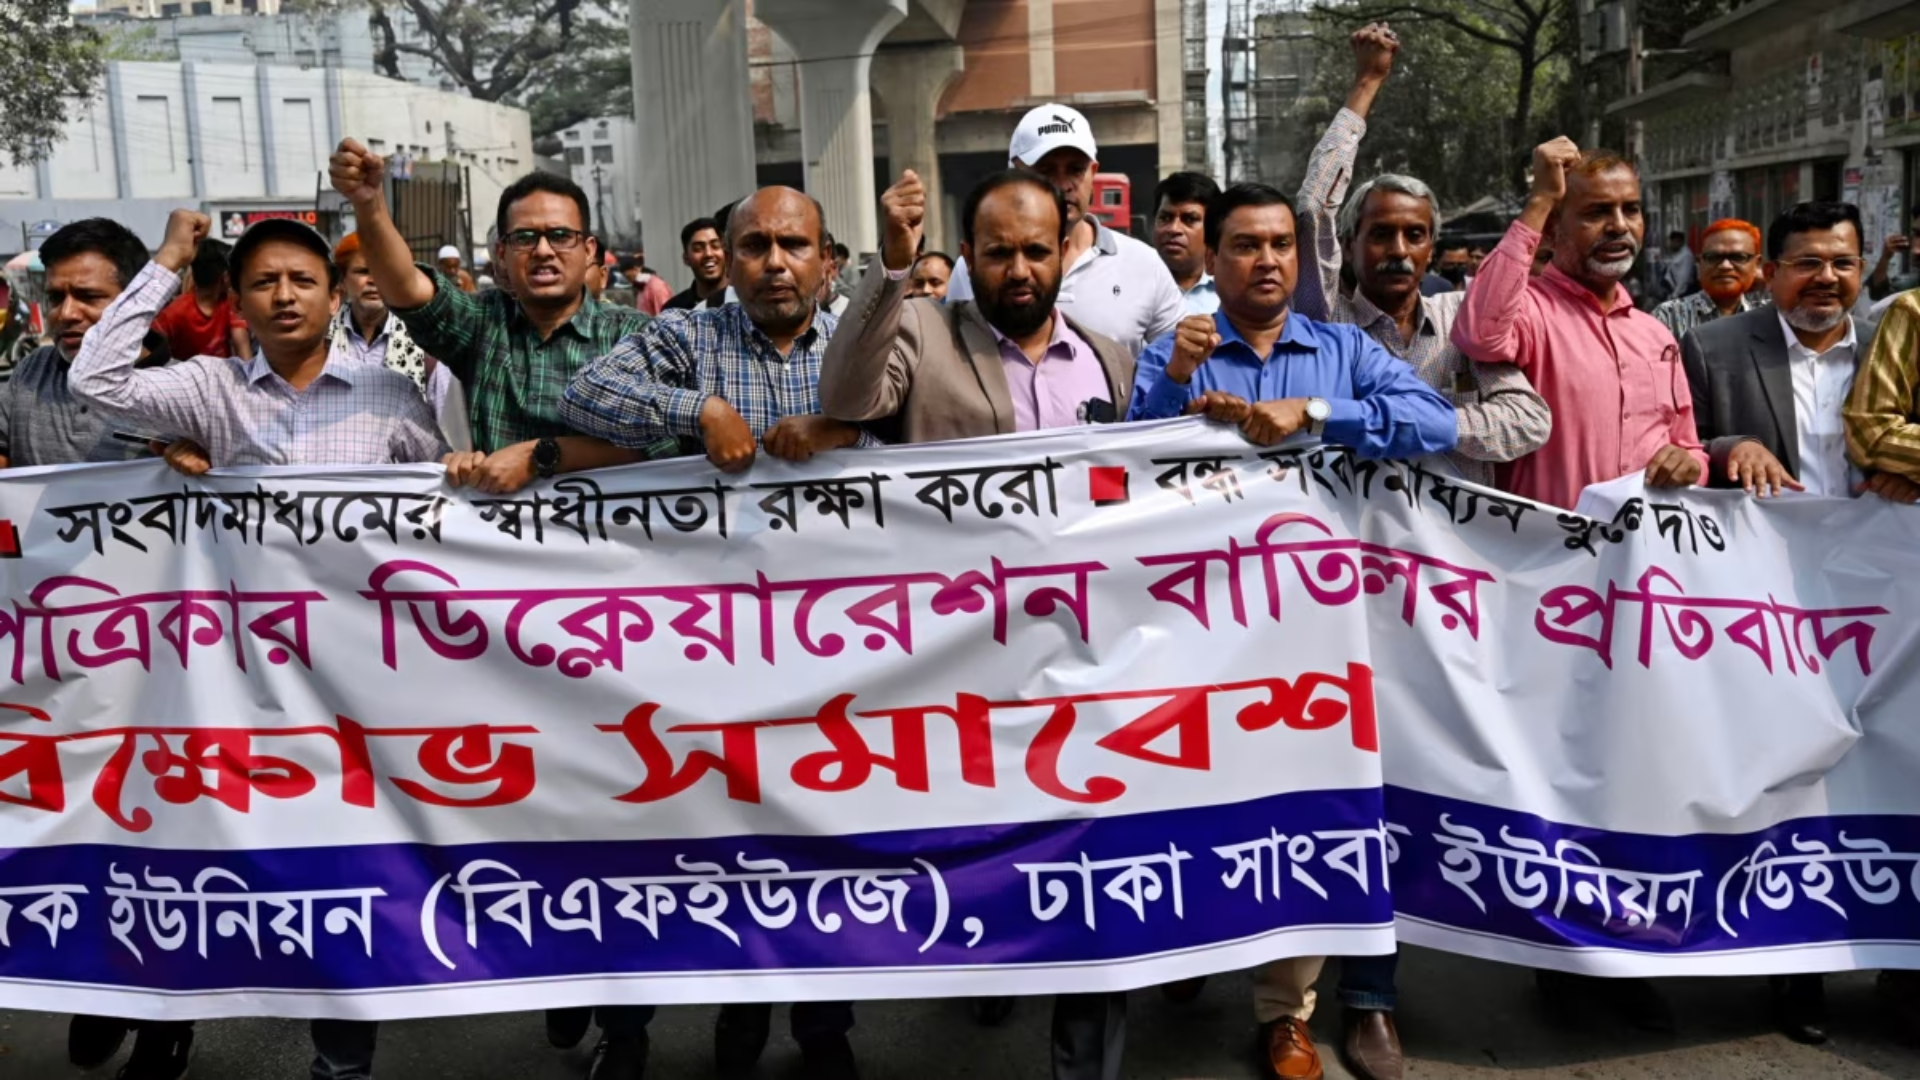 Foreign Analysts Warn: Protests In Bangladesh Raise Global Concerns